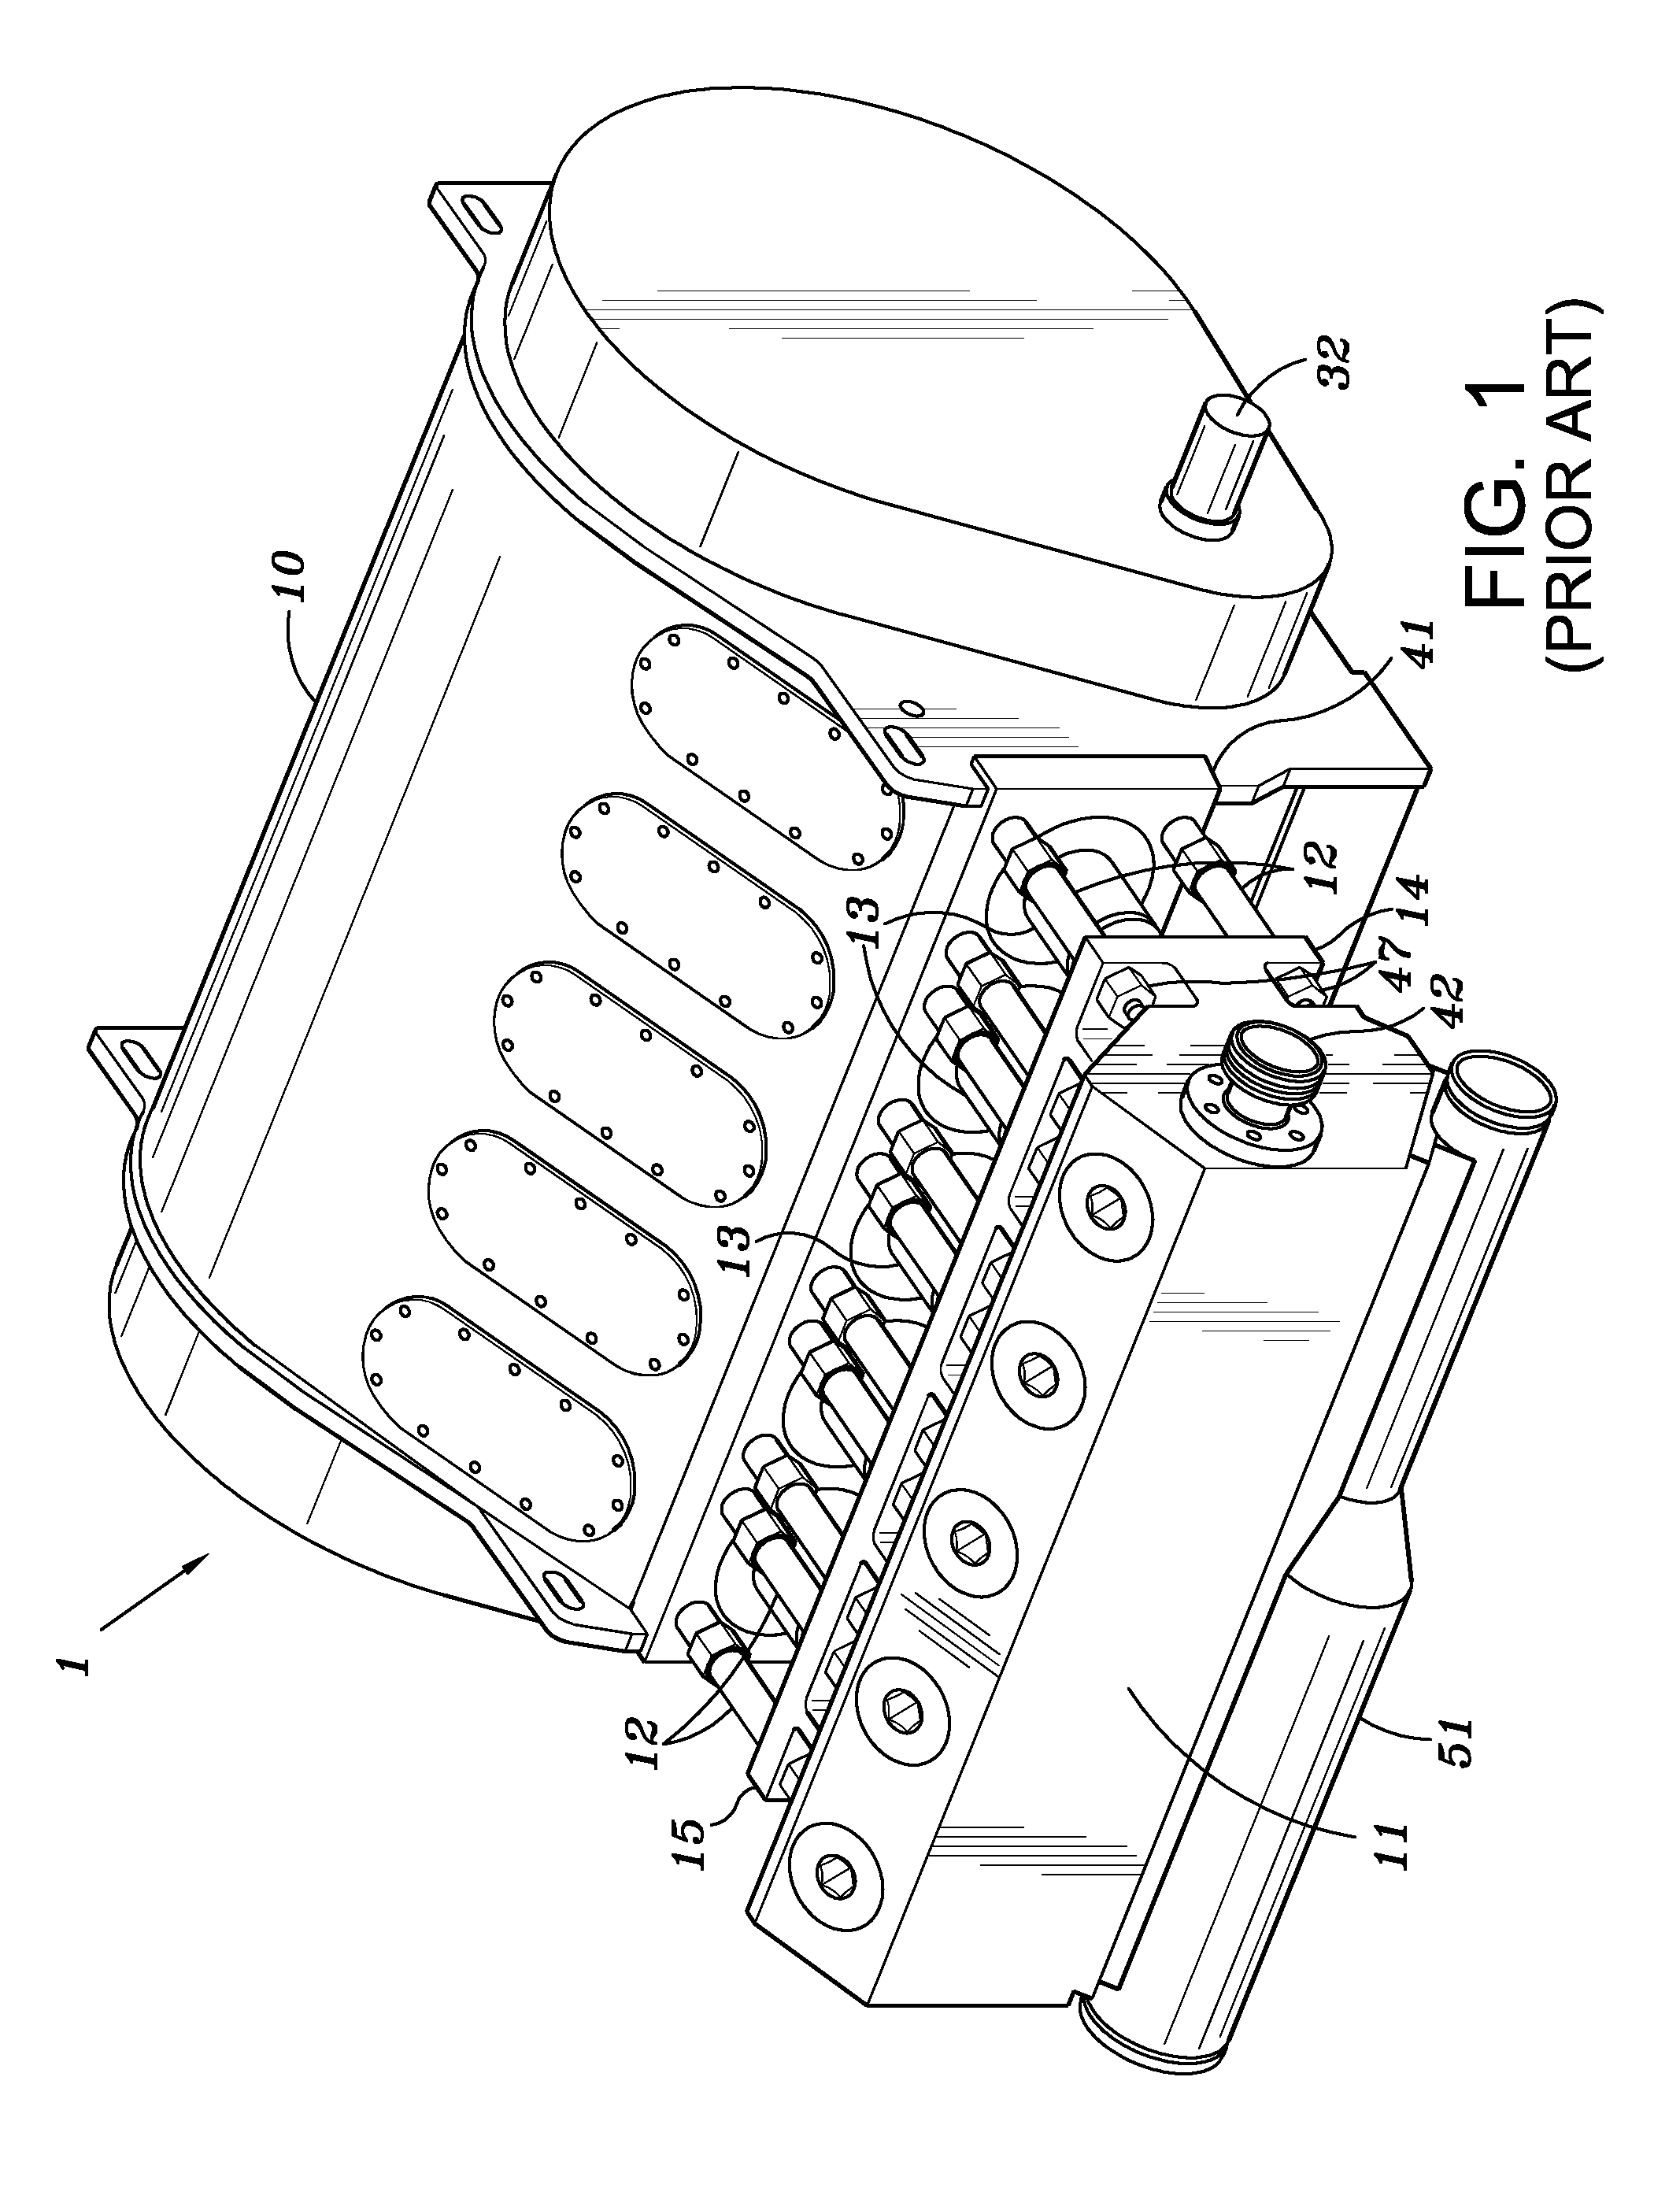 Support Mechanism for the Fluid End of a High Pressure Pump